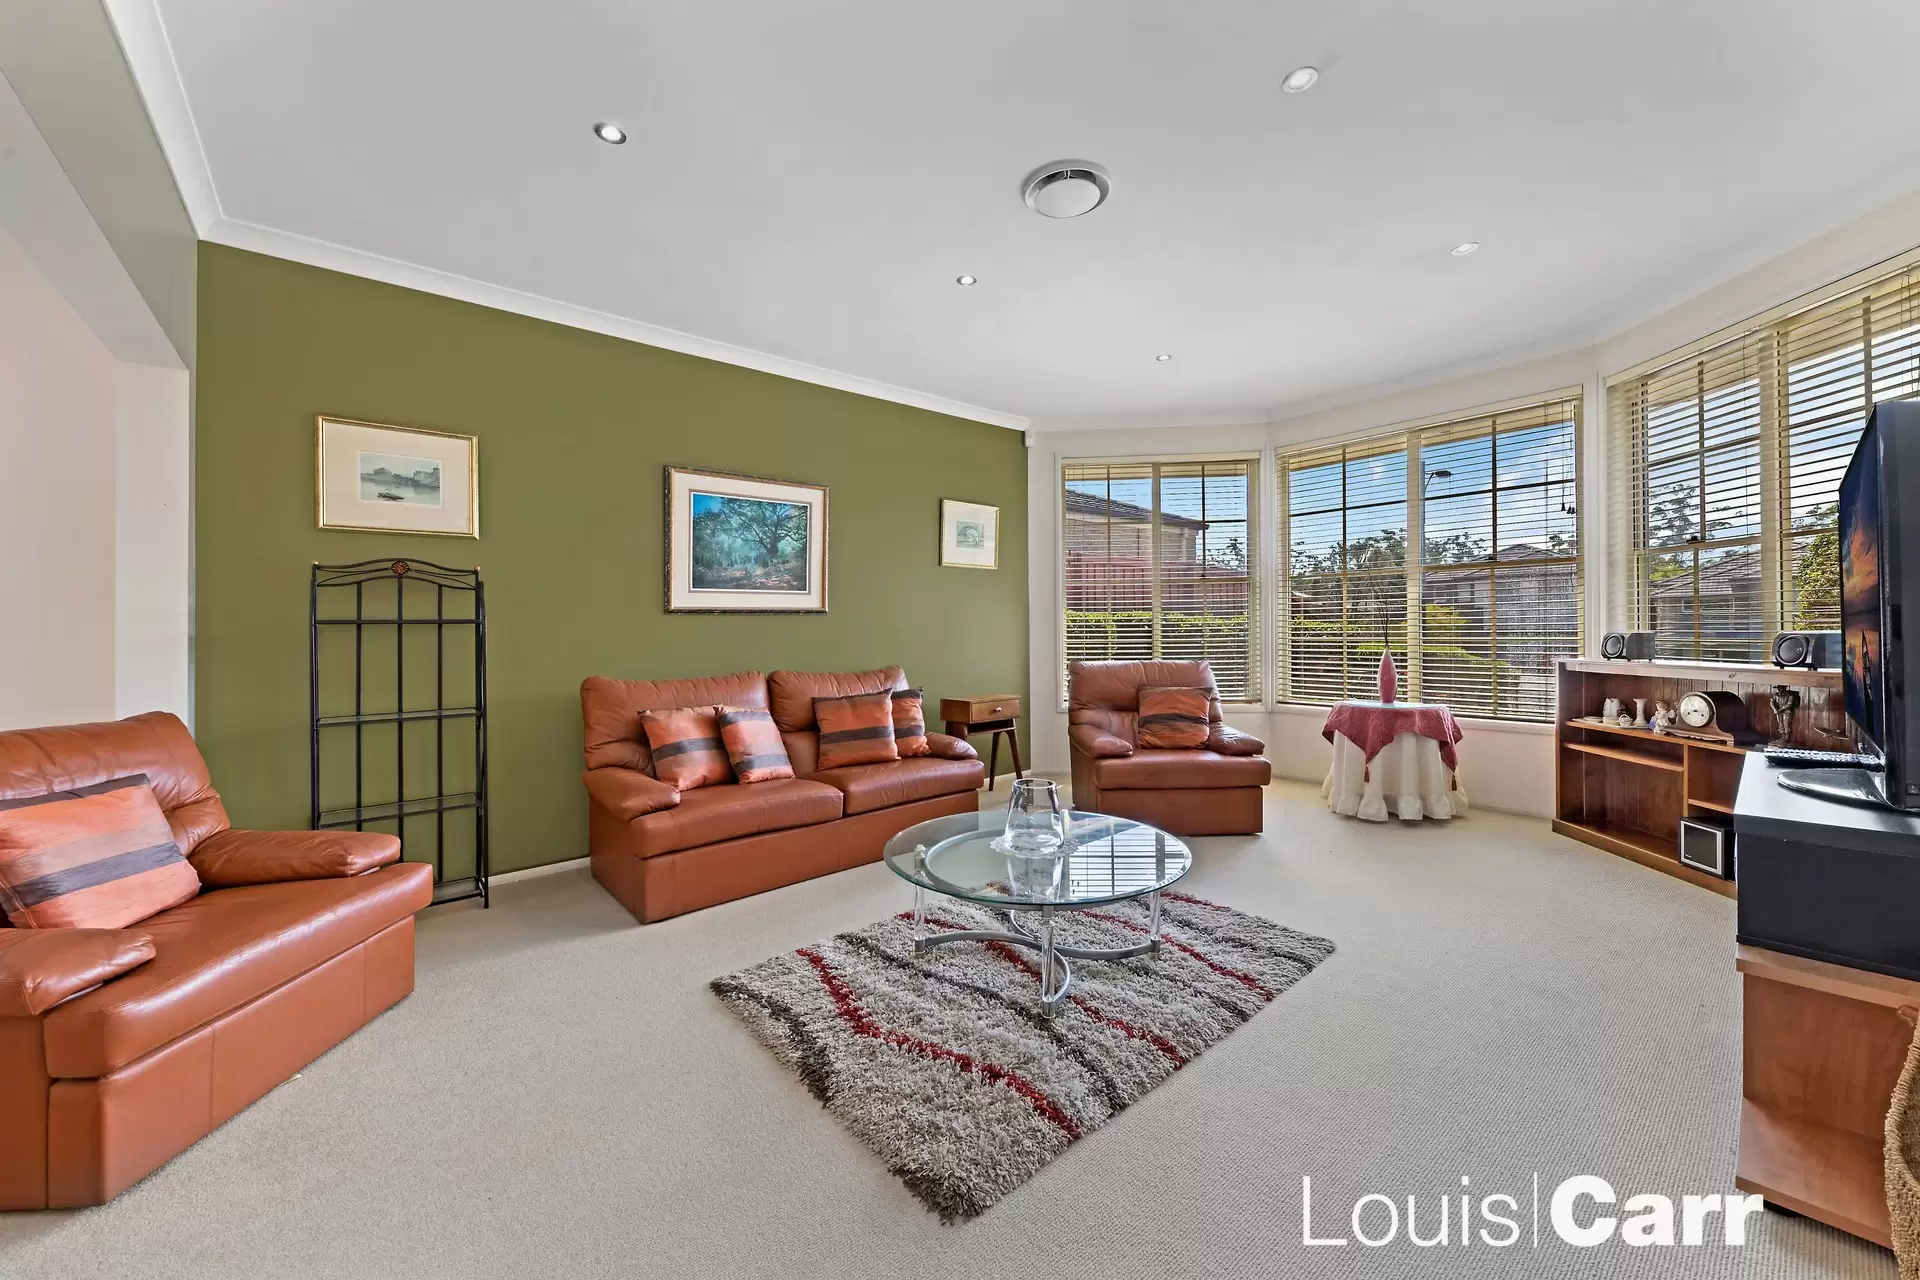 Photo #2: 54 York Road, Kellyville - Sold by Louis Carr Real Estate